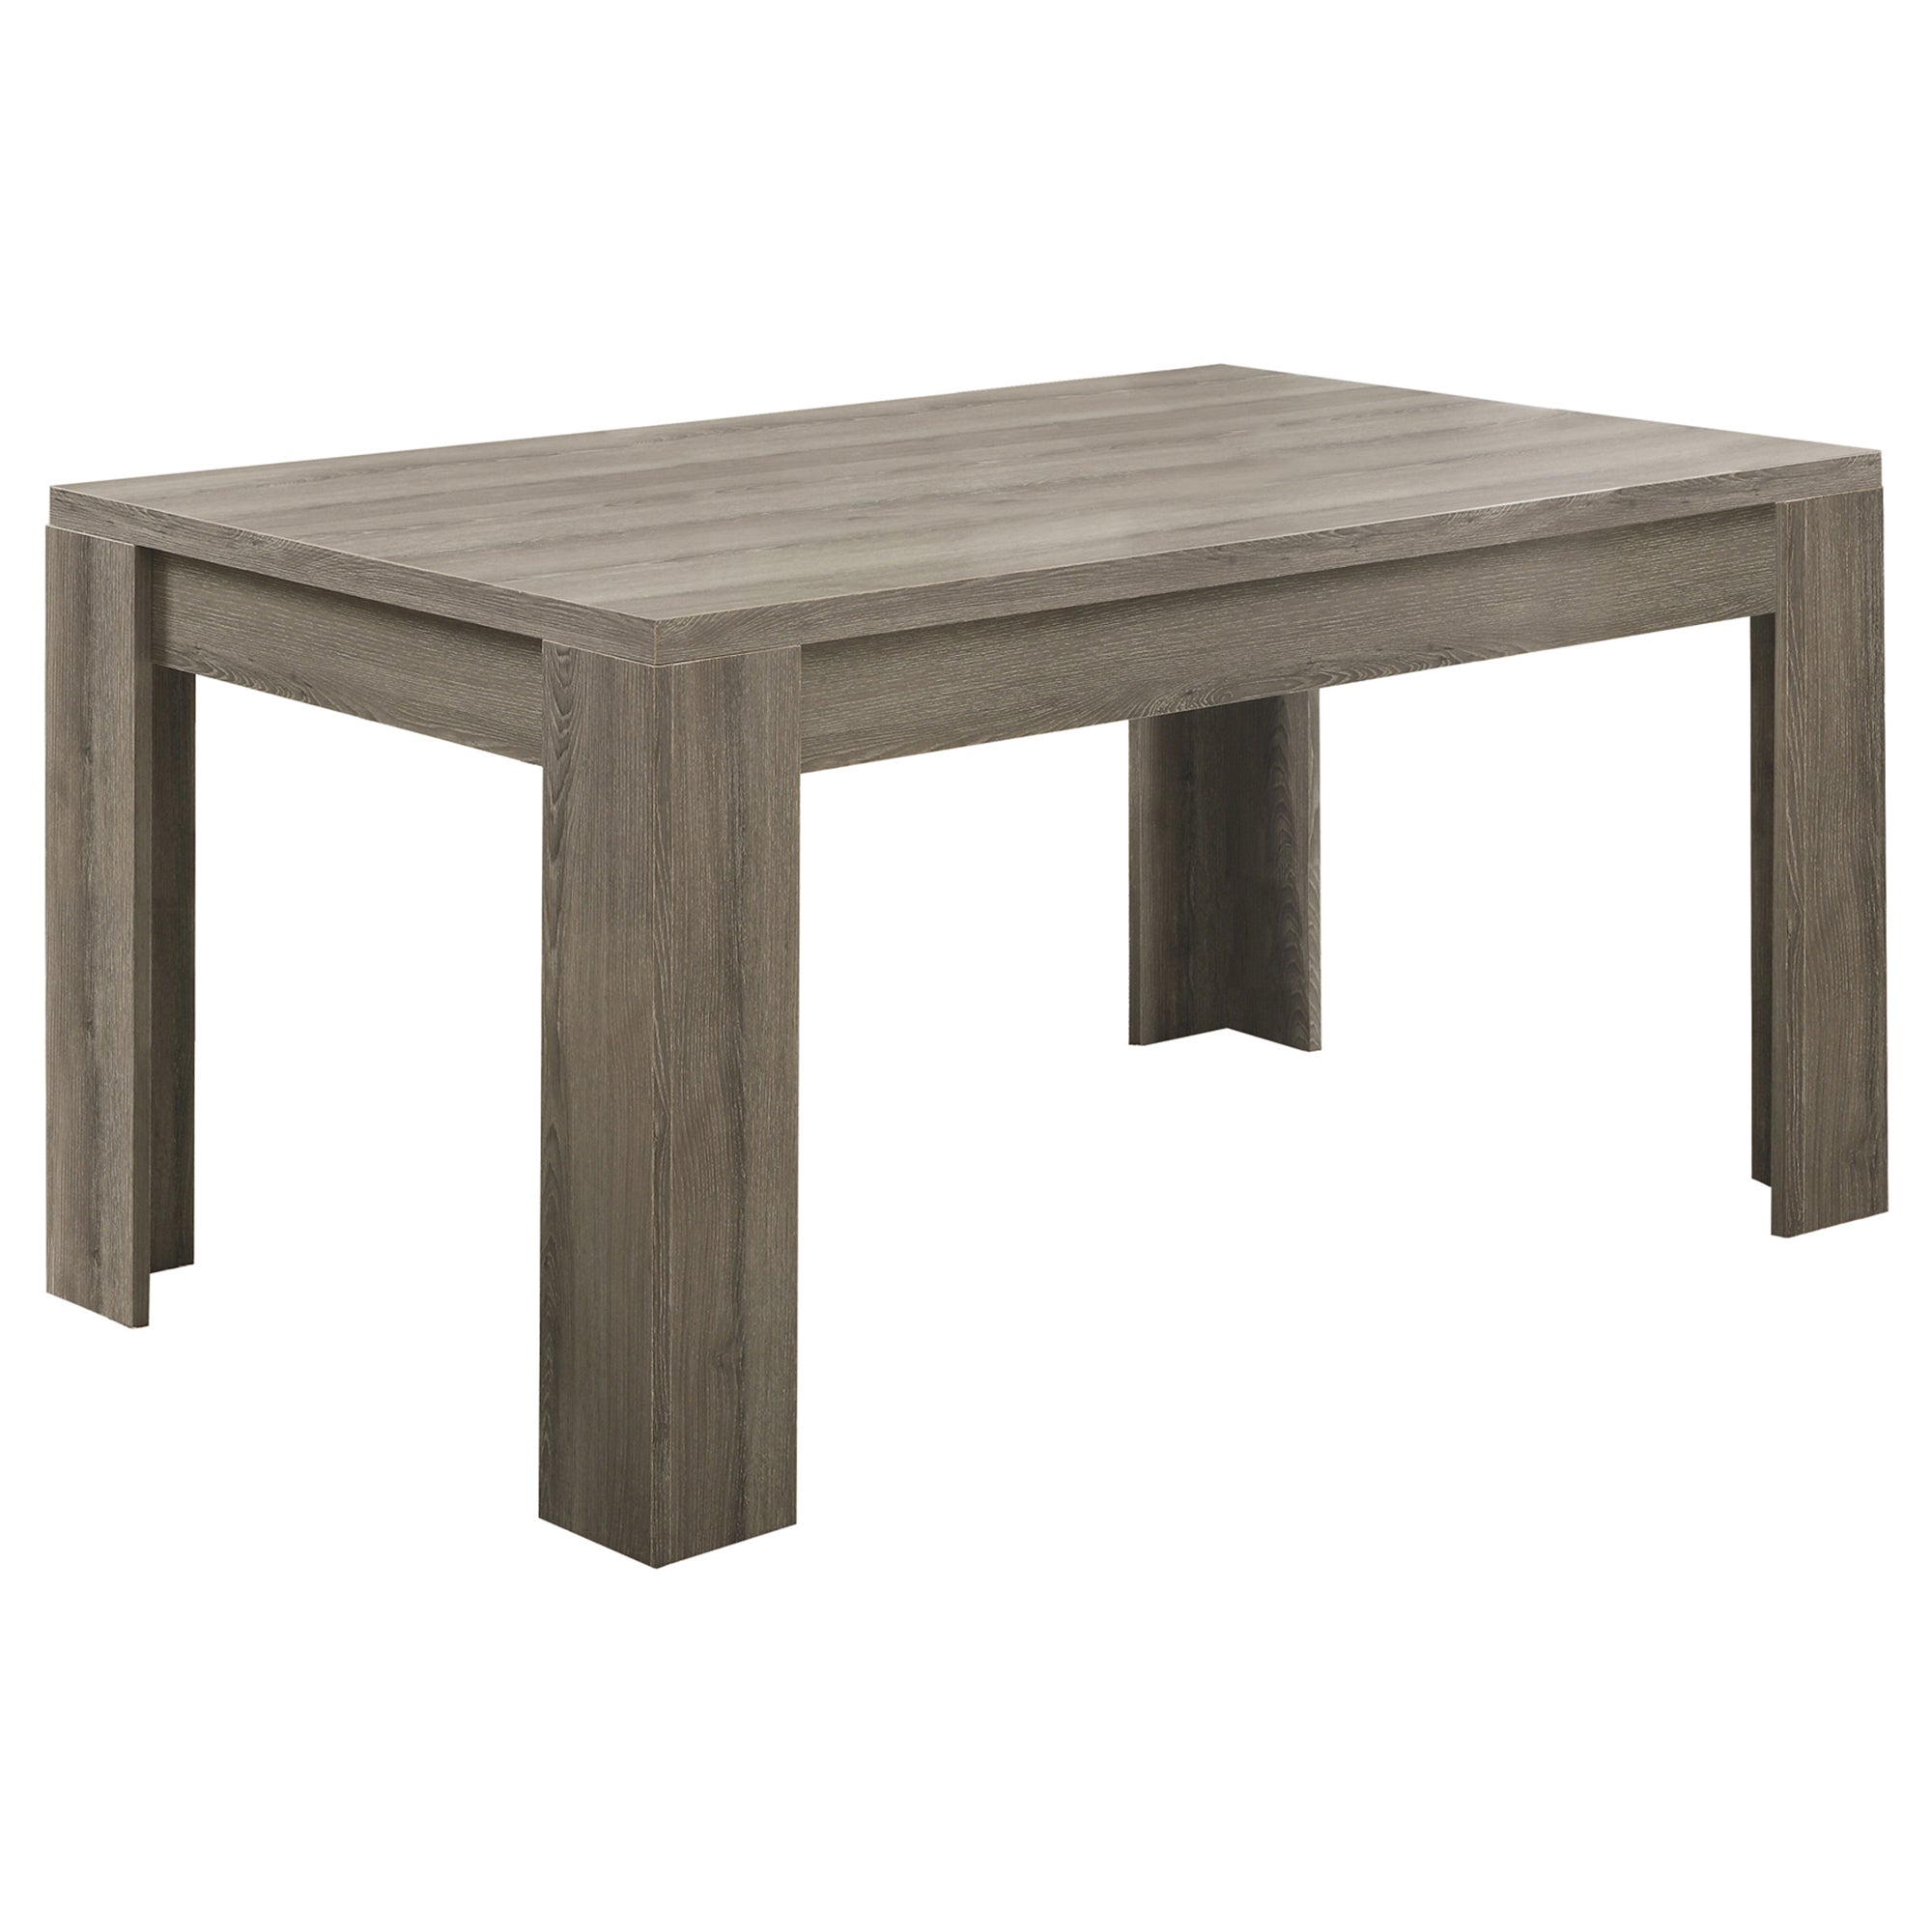 140" White Solid Wood And Metal Dining Table